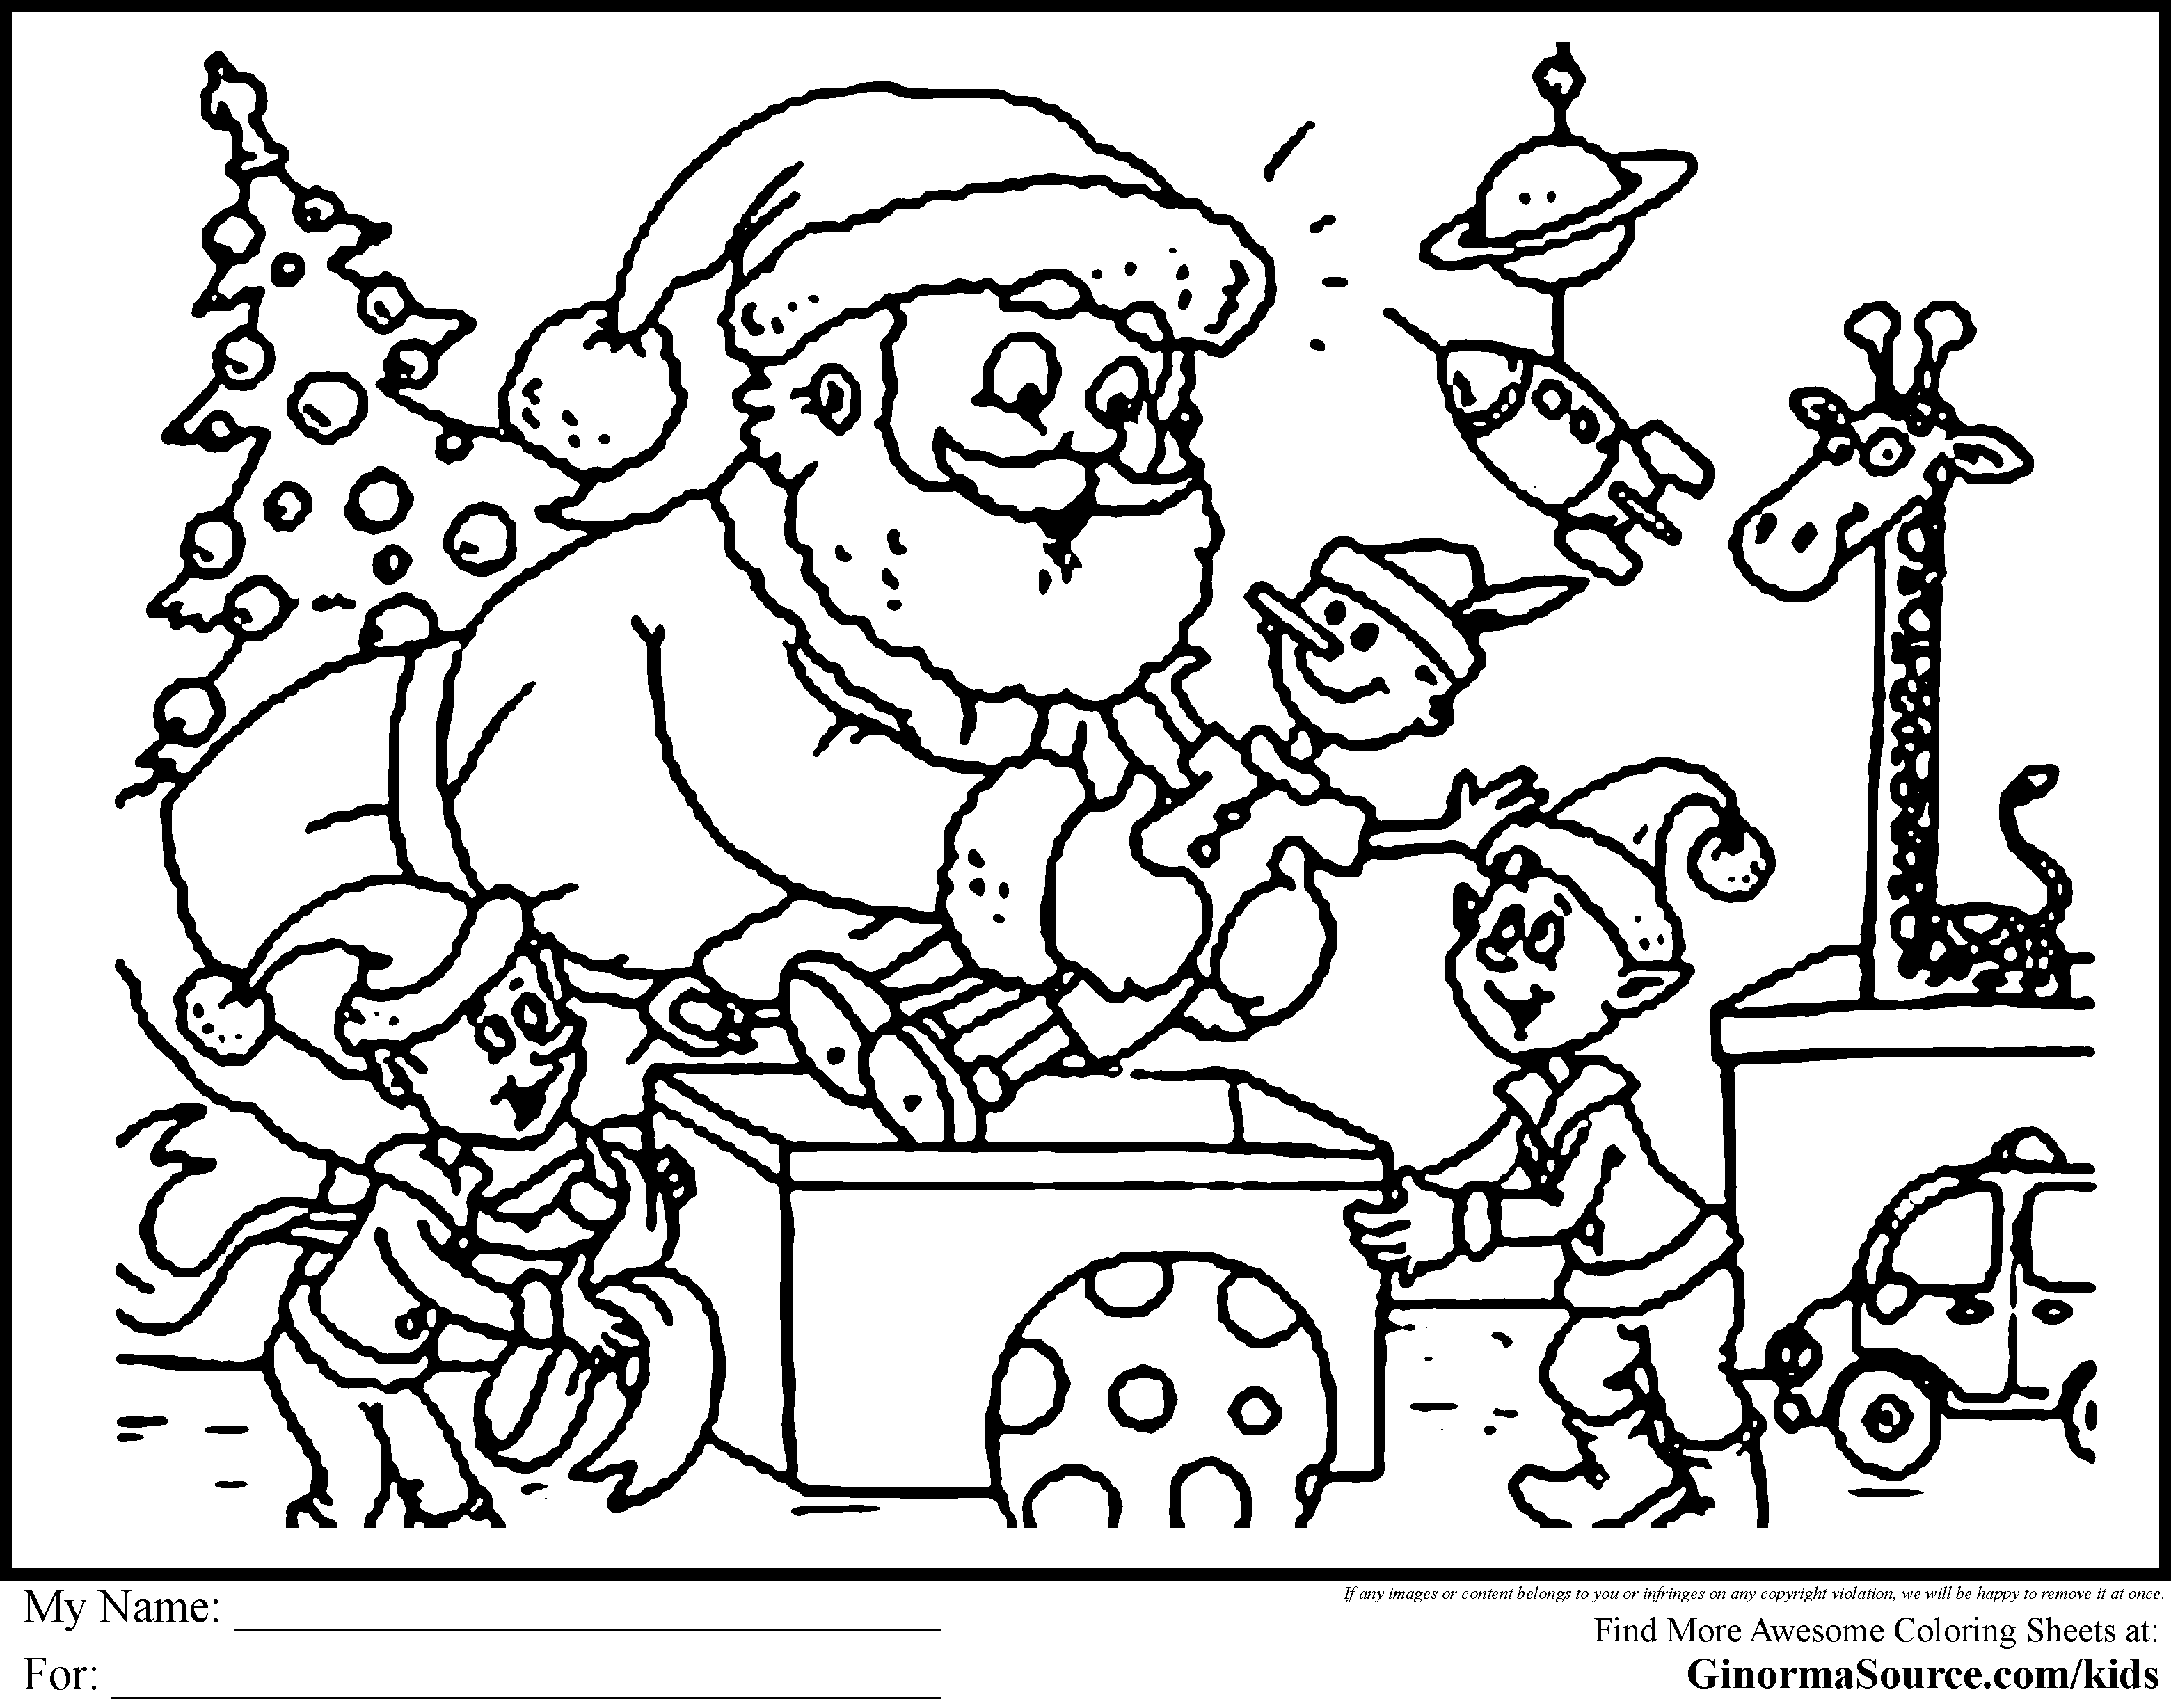 Christmas Elf Coloring Page